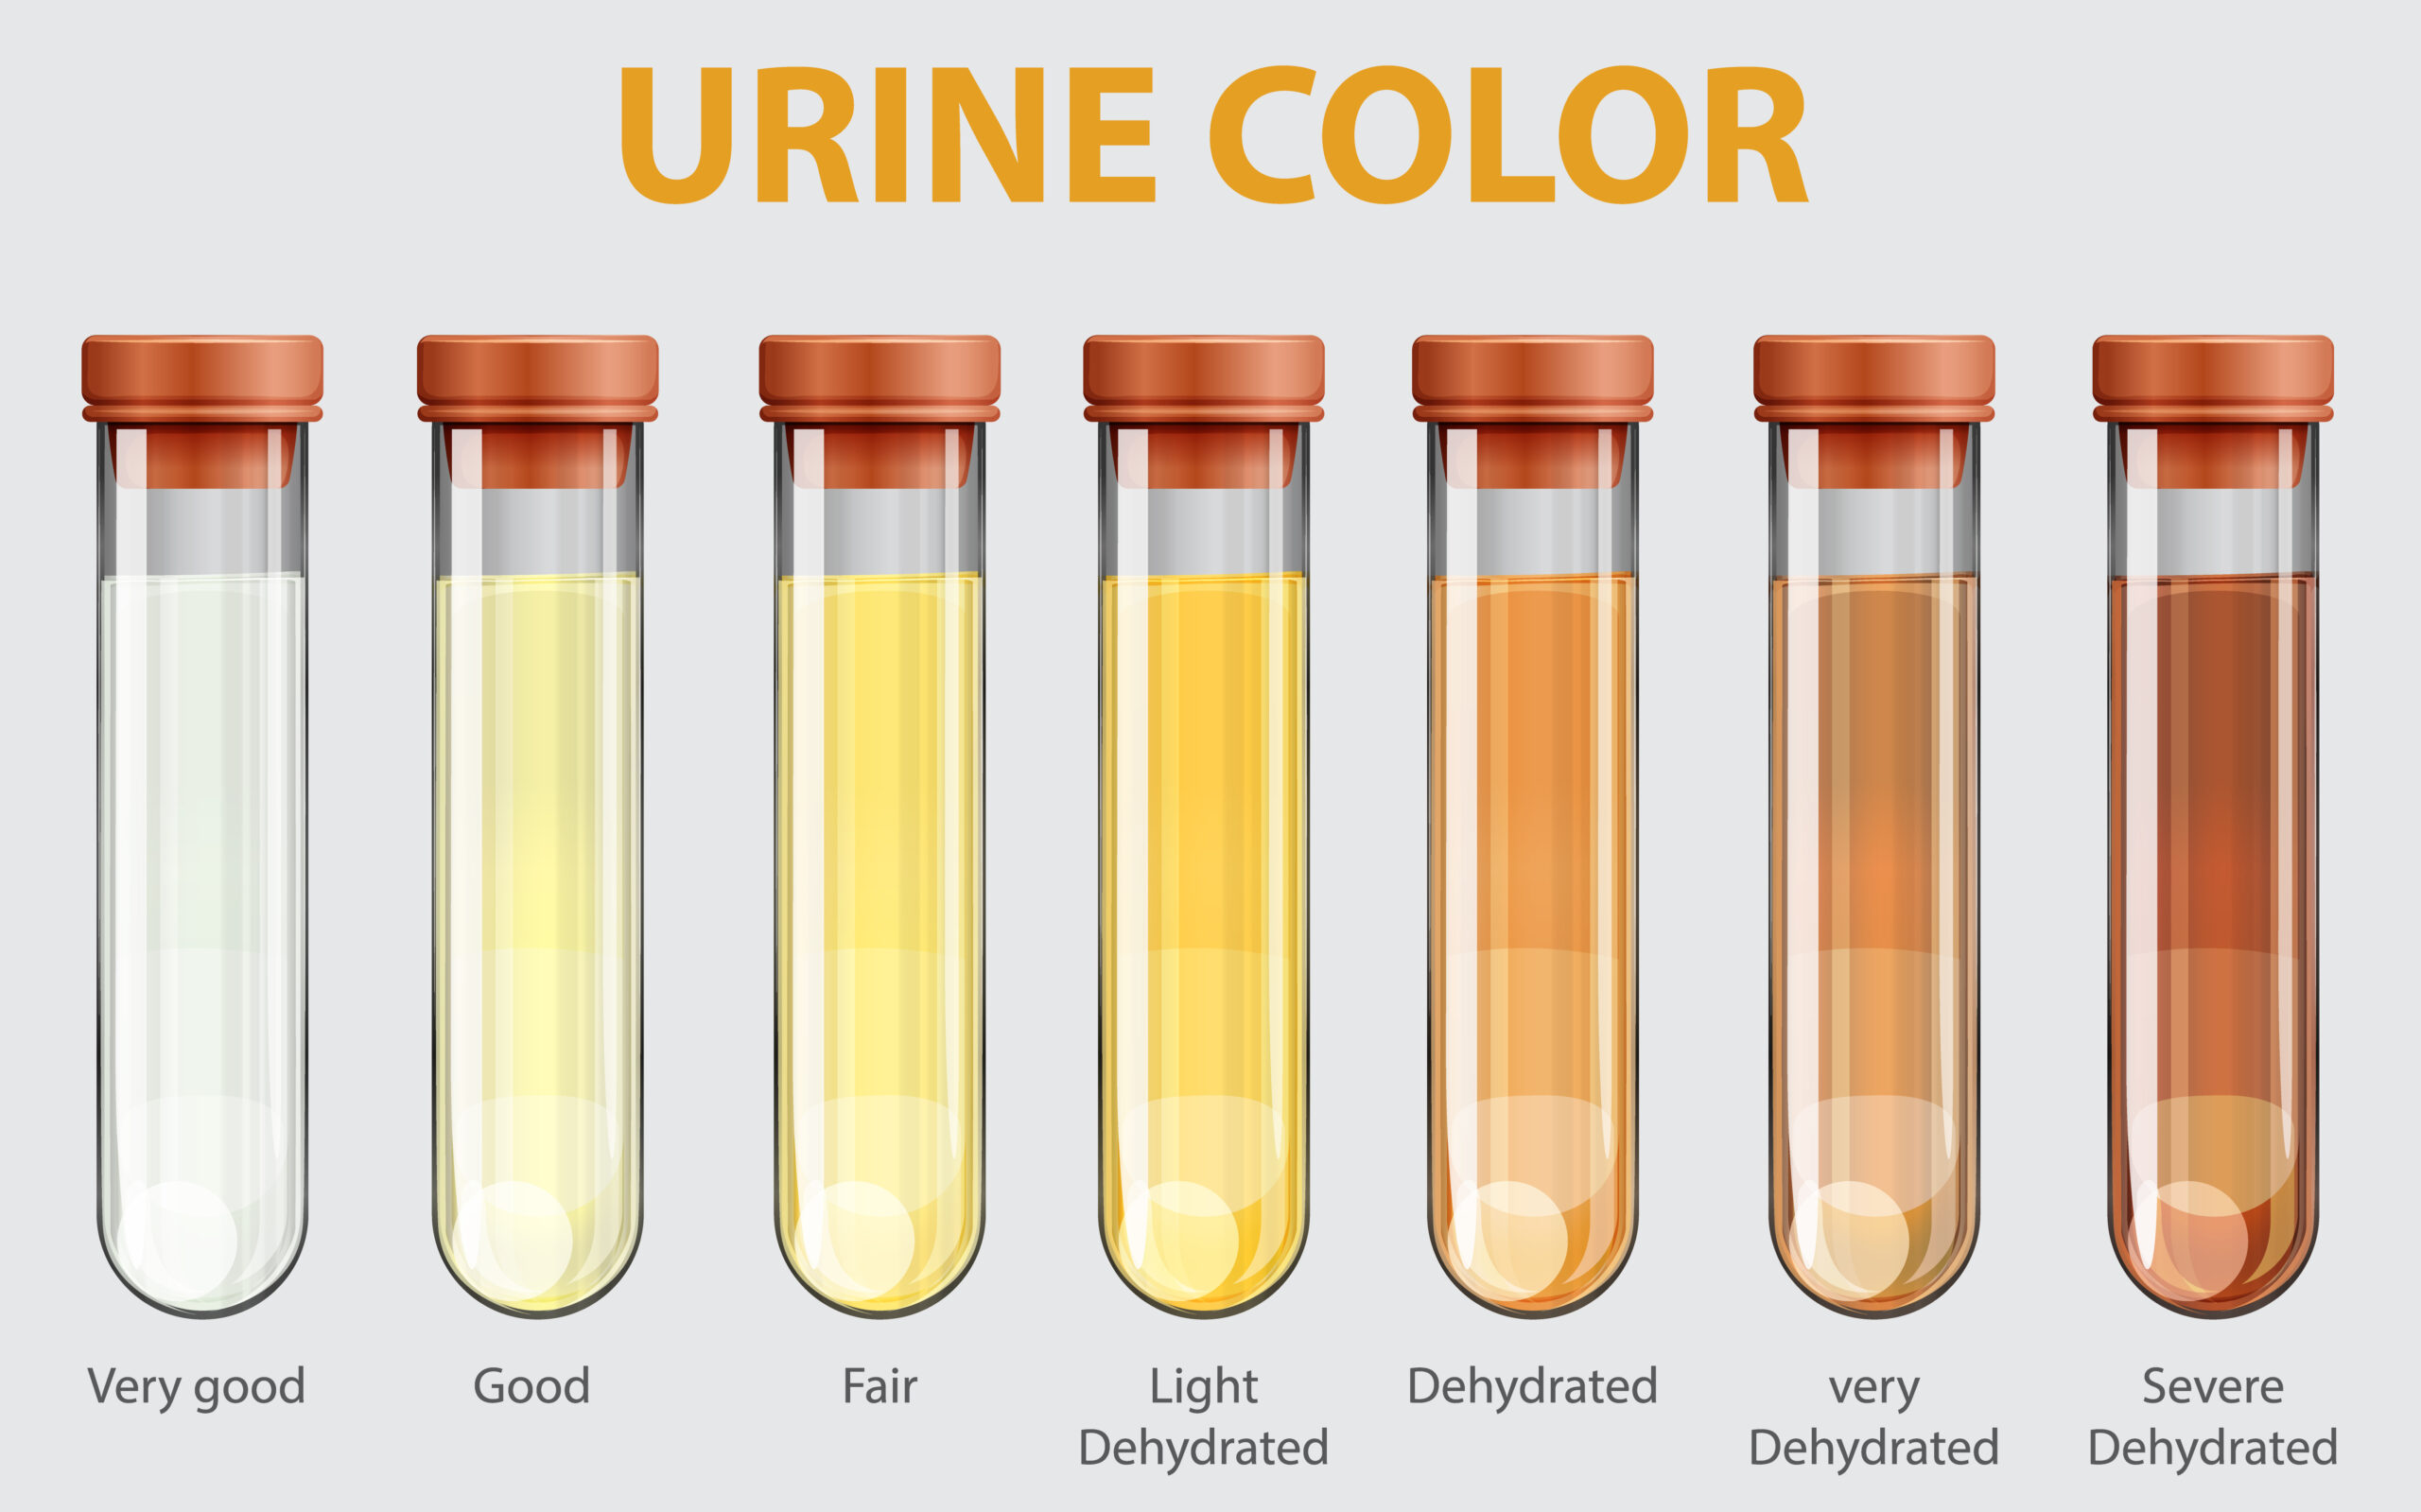 7 Urine Colors: A Comprehensive Guide to Normalcy and When to Seek Medical Attention